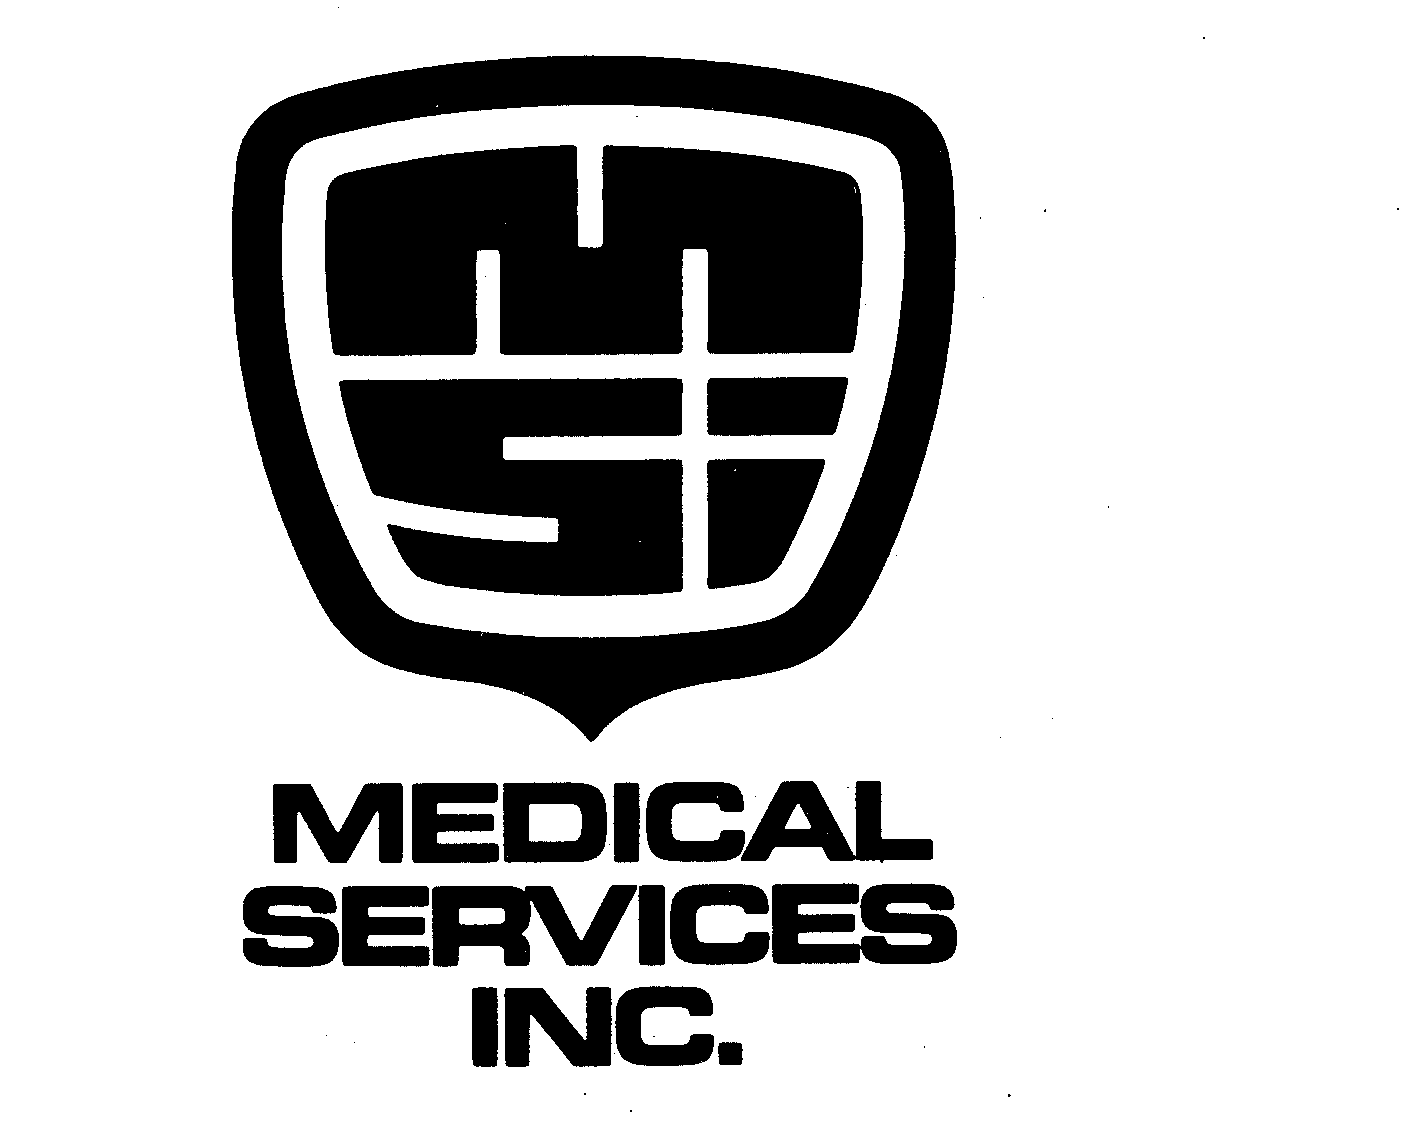  MEDICAL SERVICES INC.